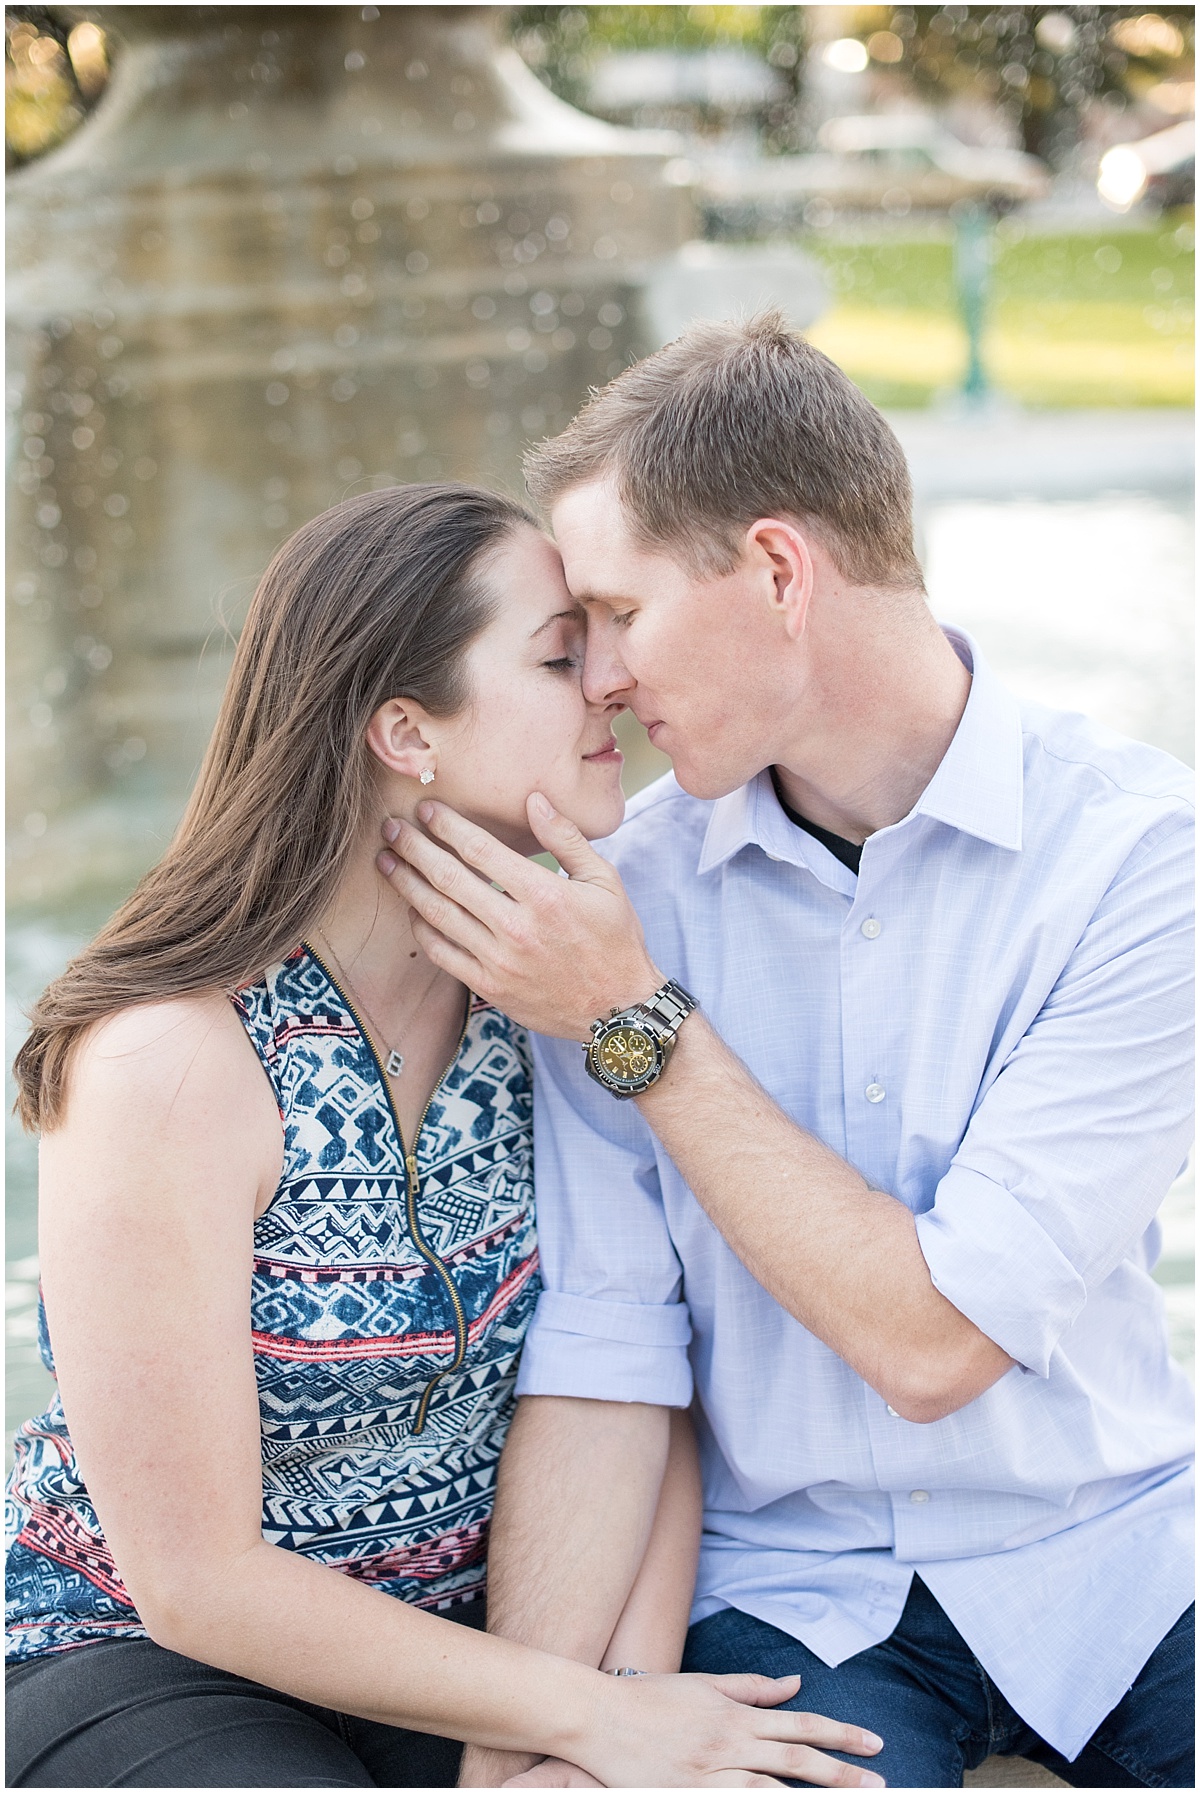 Engagement Session at the historic downtown Atascadero City Hall in California